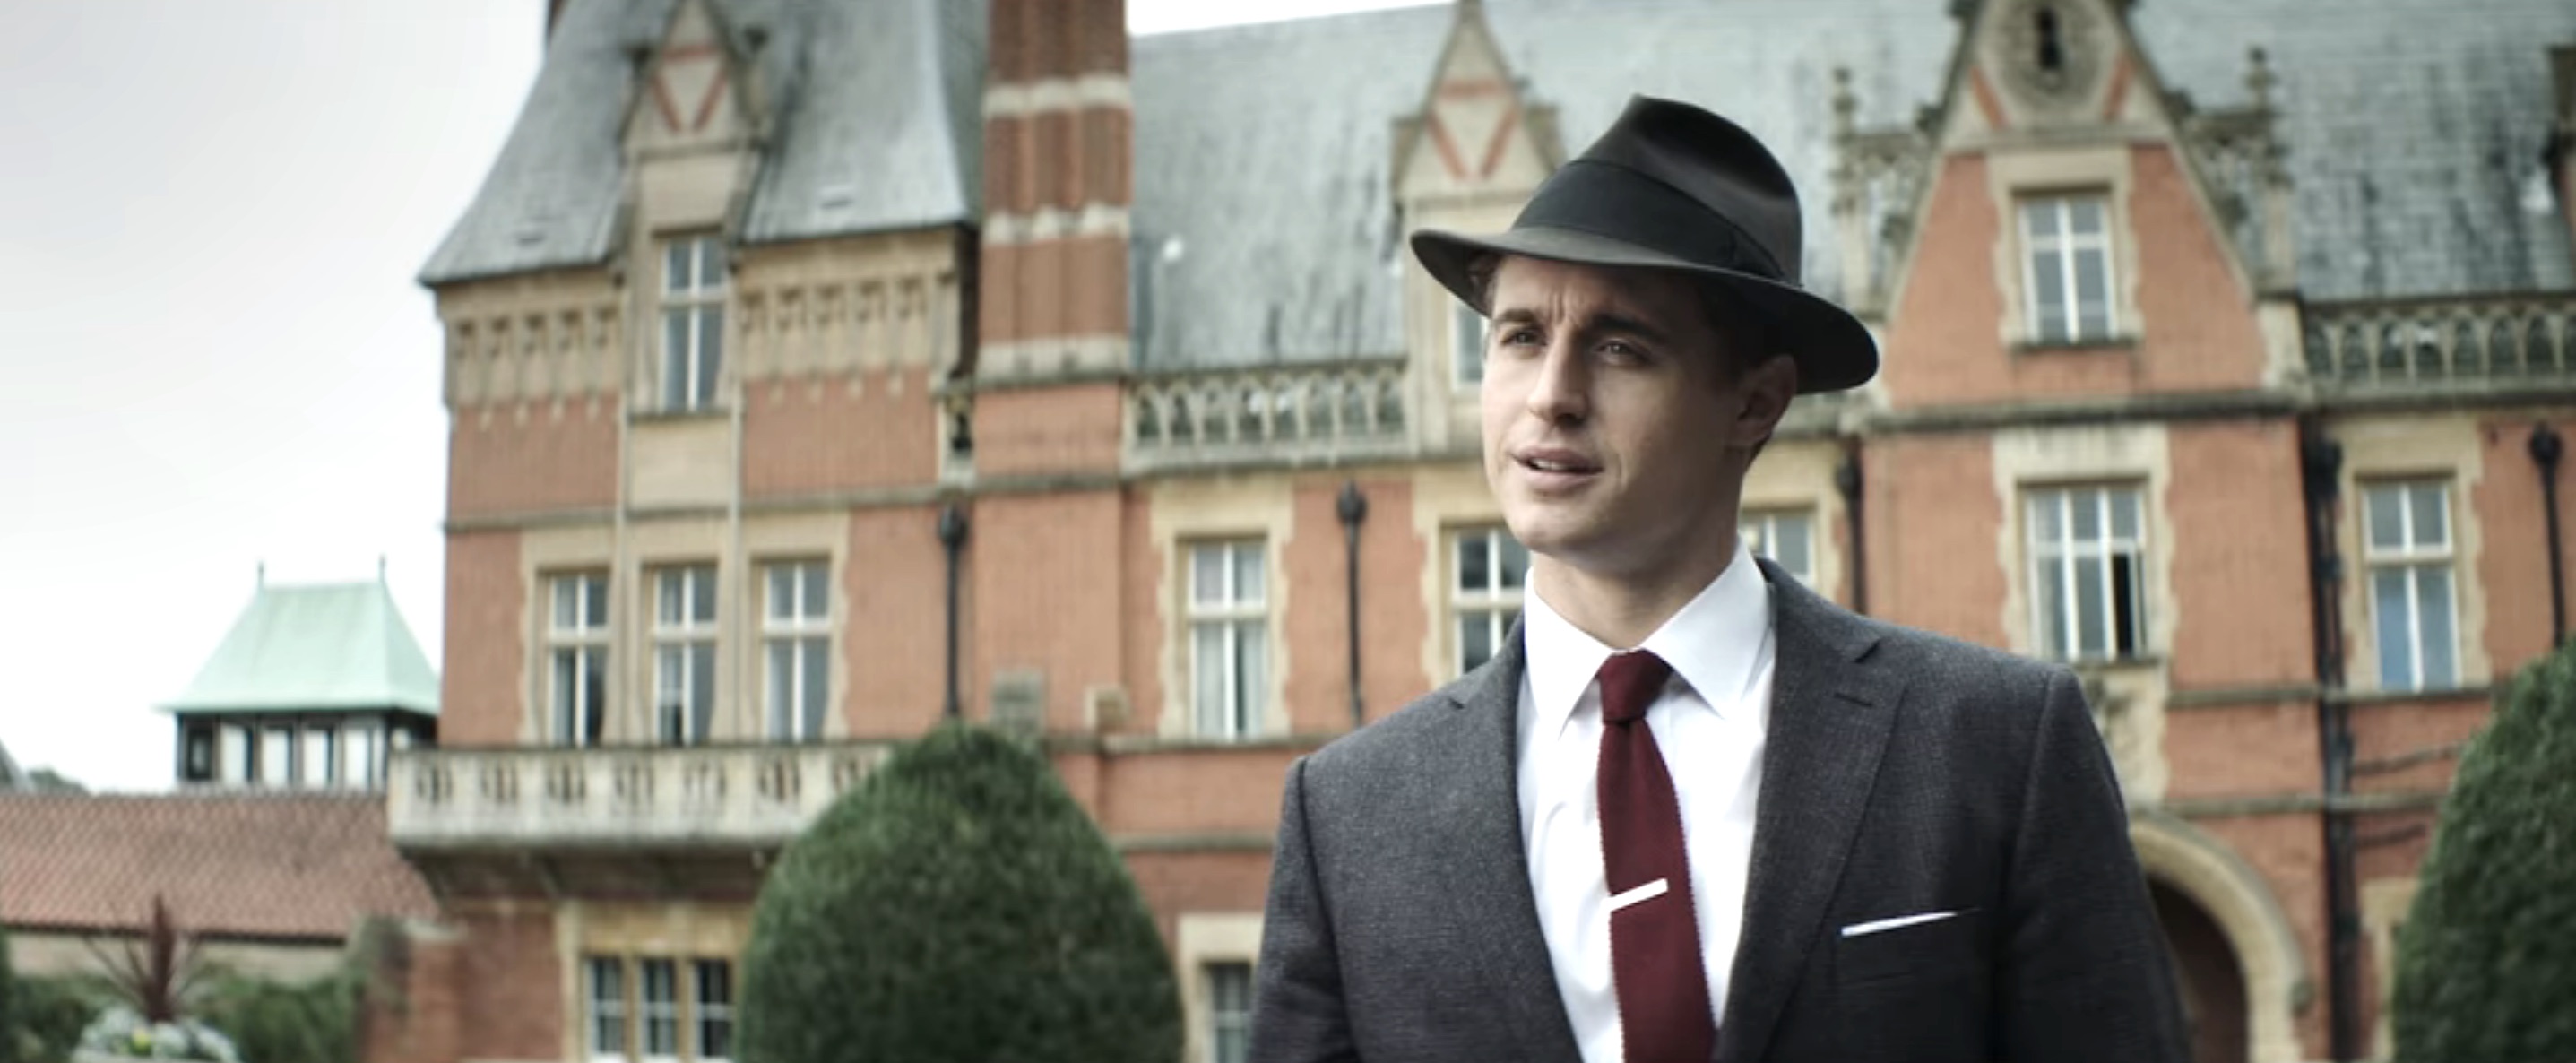 Crooked House Cast - Max Irons as Charles Hayward